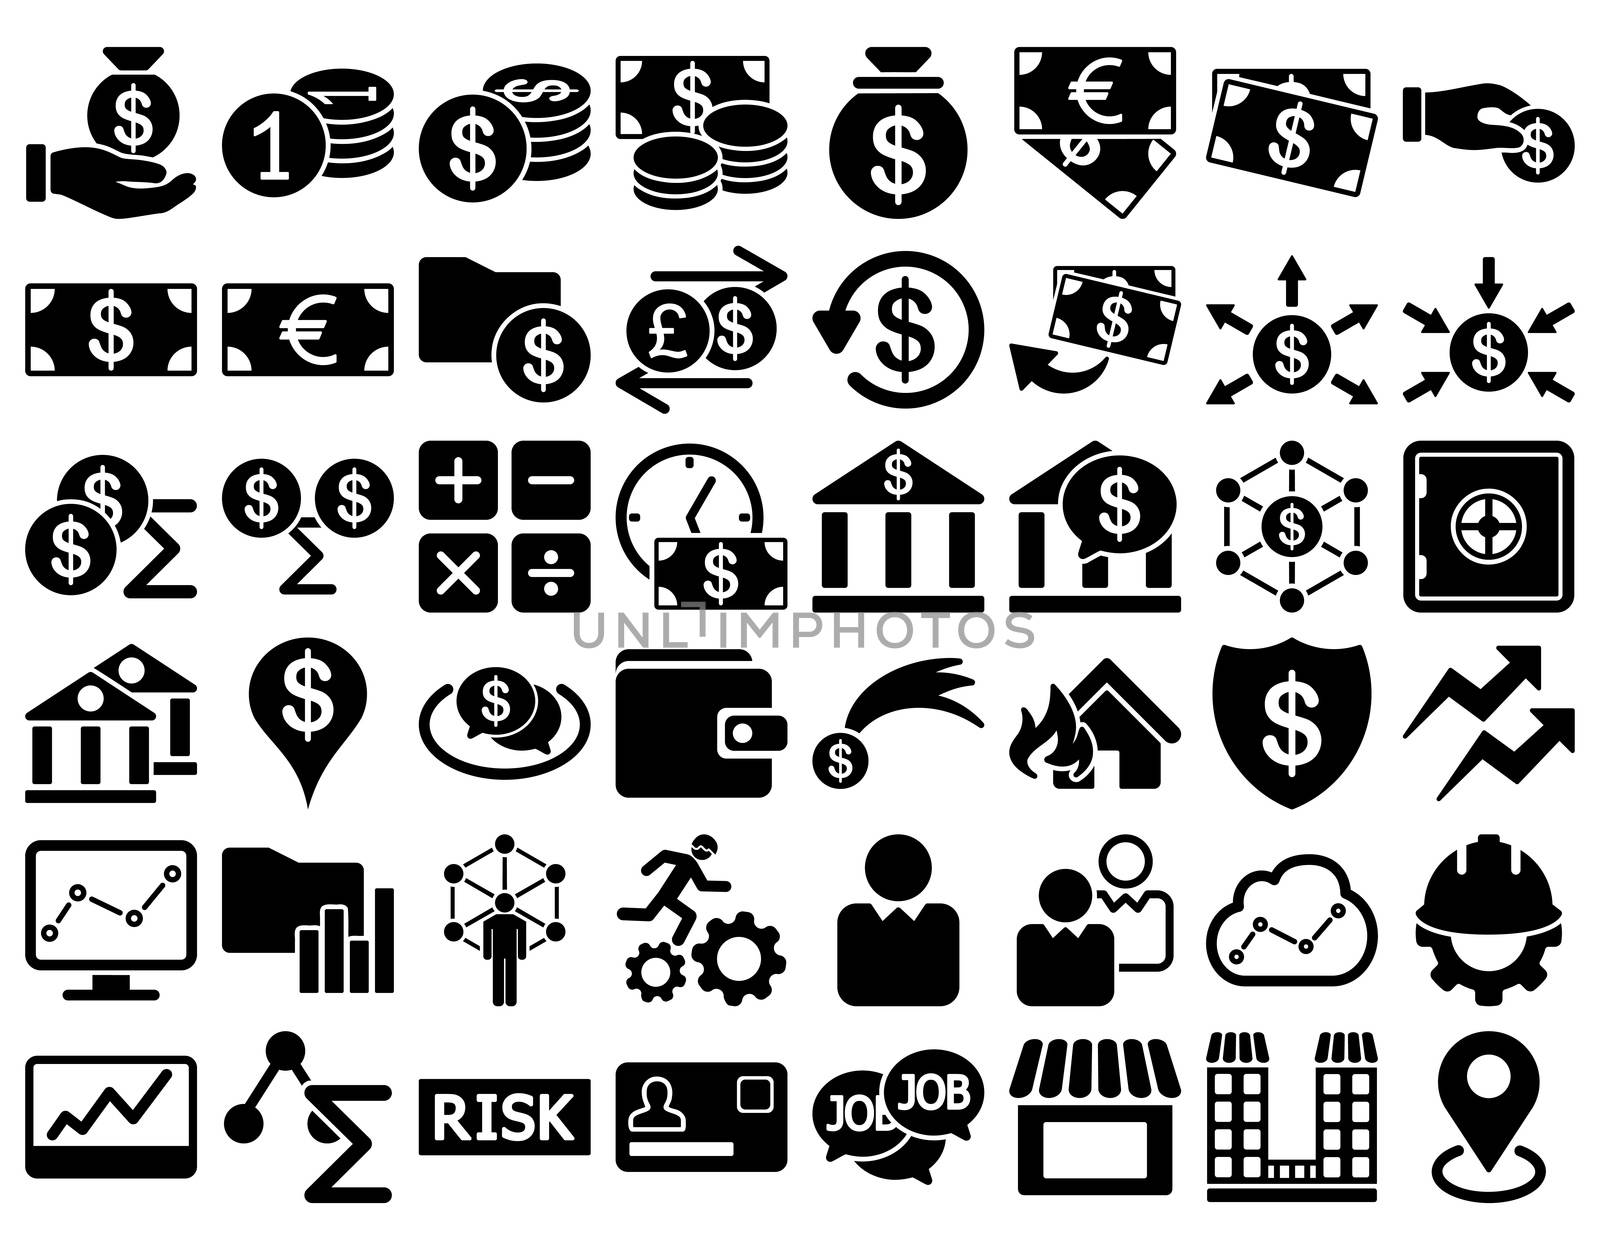 Business Icon Set. These flat icons use black color. Raster images are isolated on a white background.